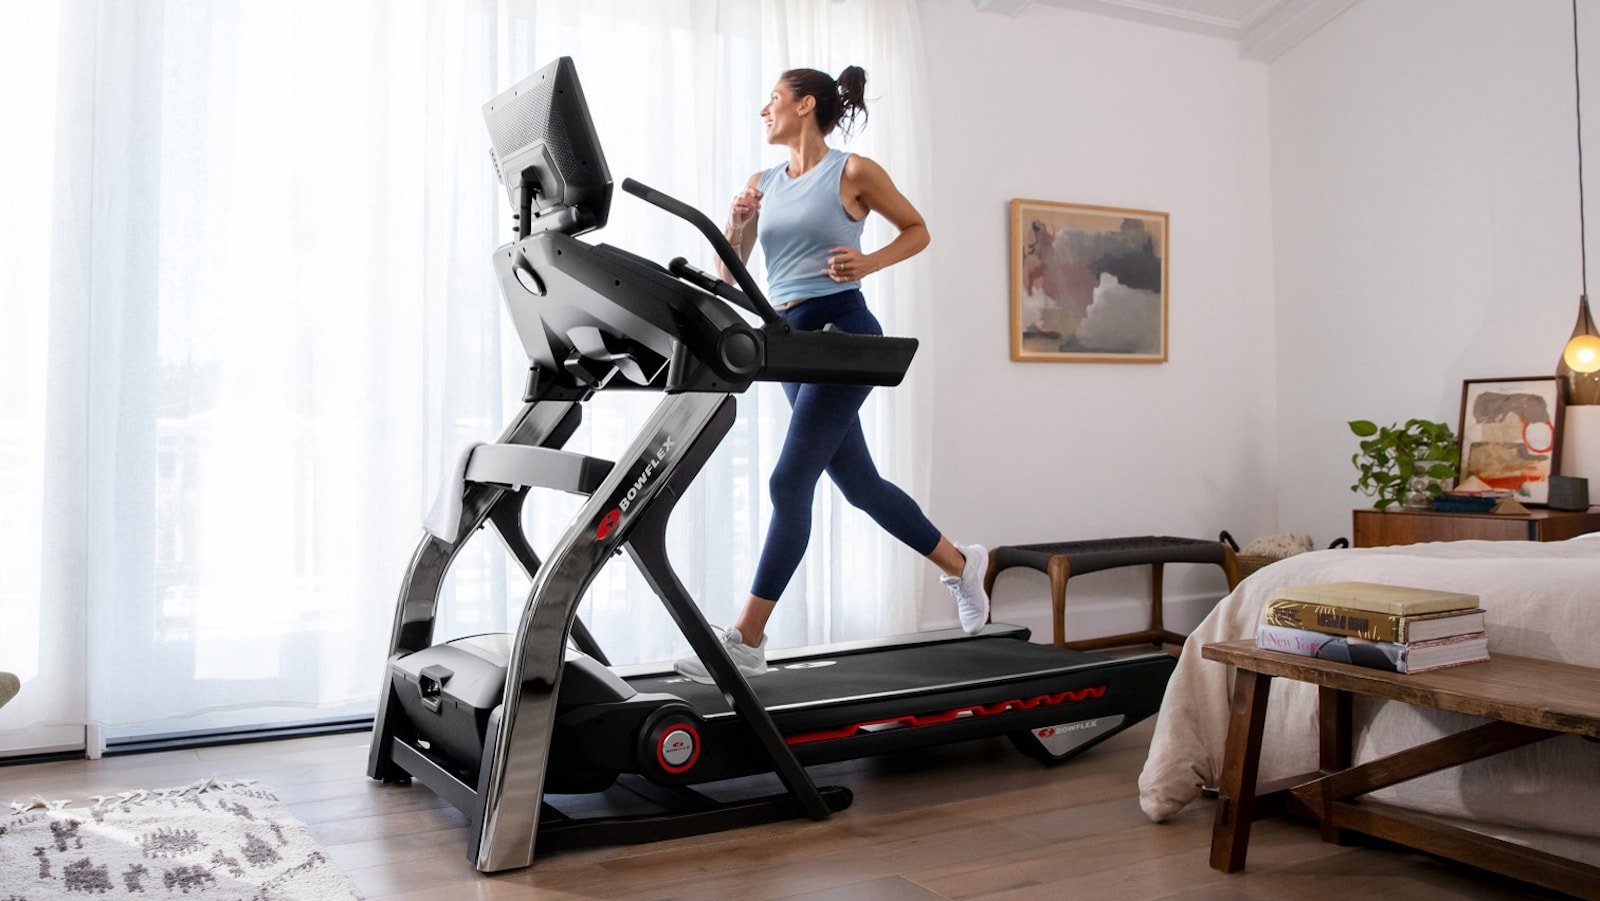 Bowflex Treadmill 22 in-home treadmill has a display that provides you with coaching